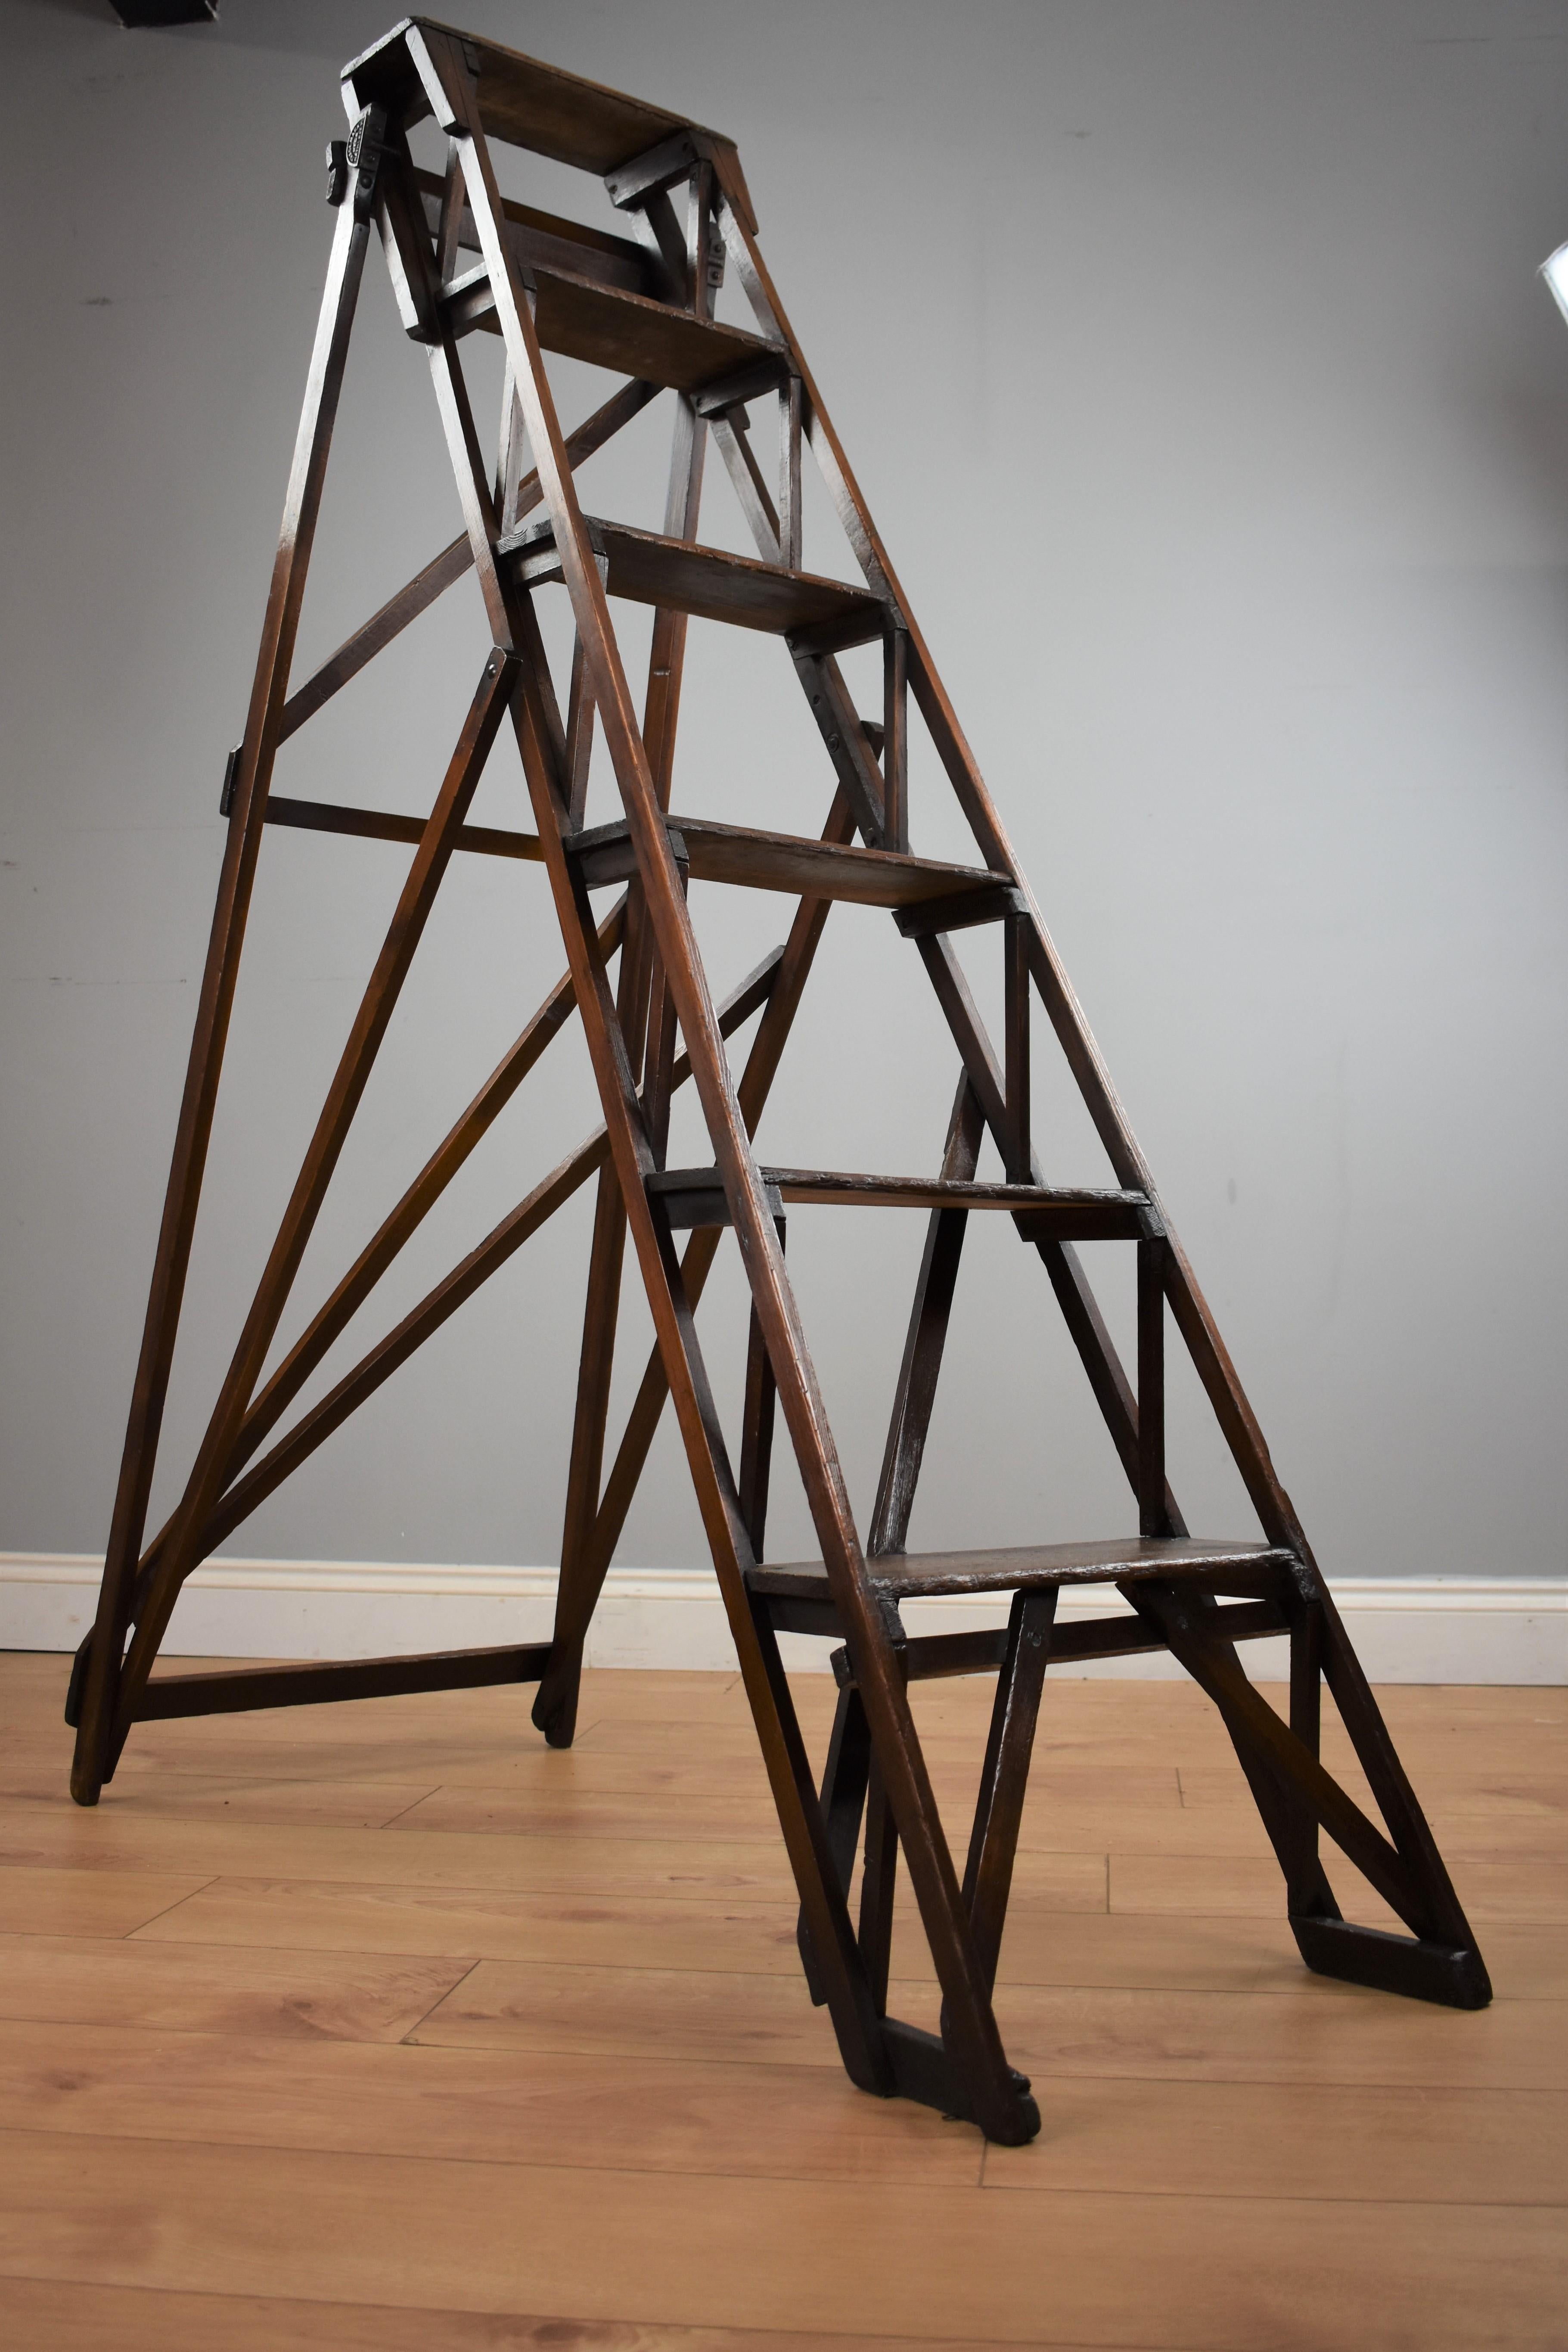 Late 19th century Hatherley Jones pine step ladder in good condition having been recently polished by hand. Ideal for a decorative piece in any study/library, the ladders have the Hatherleys patent makers plate which is photographed.

For